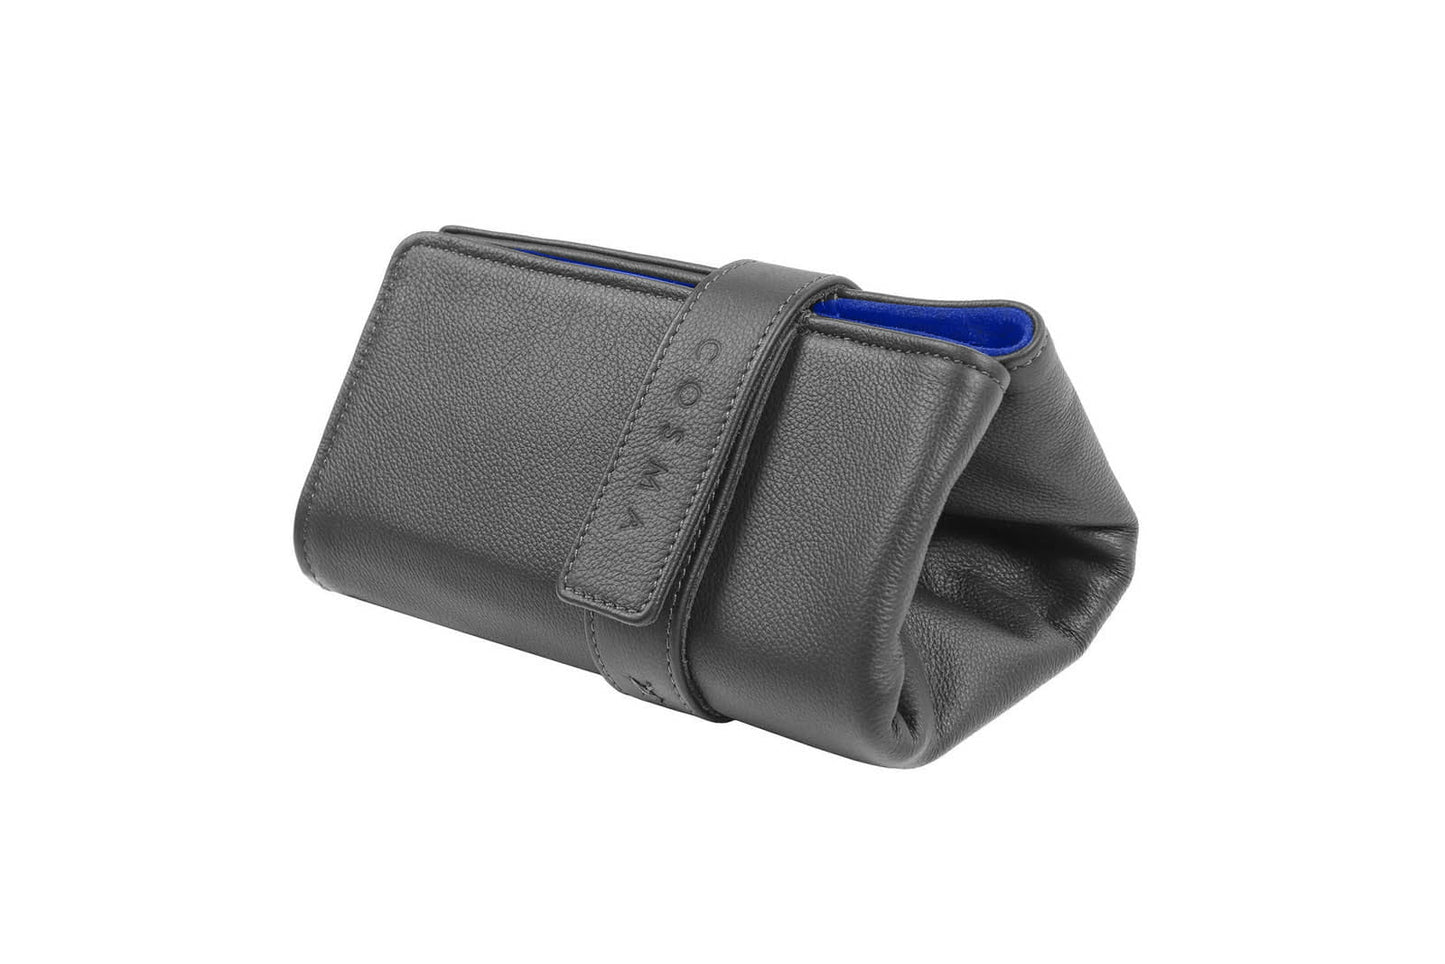 Leather Watch Pouch for 3 watches - Black / Royal Blue